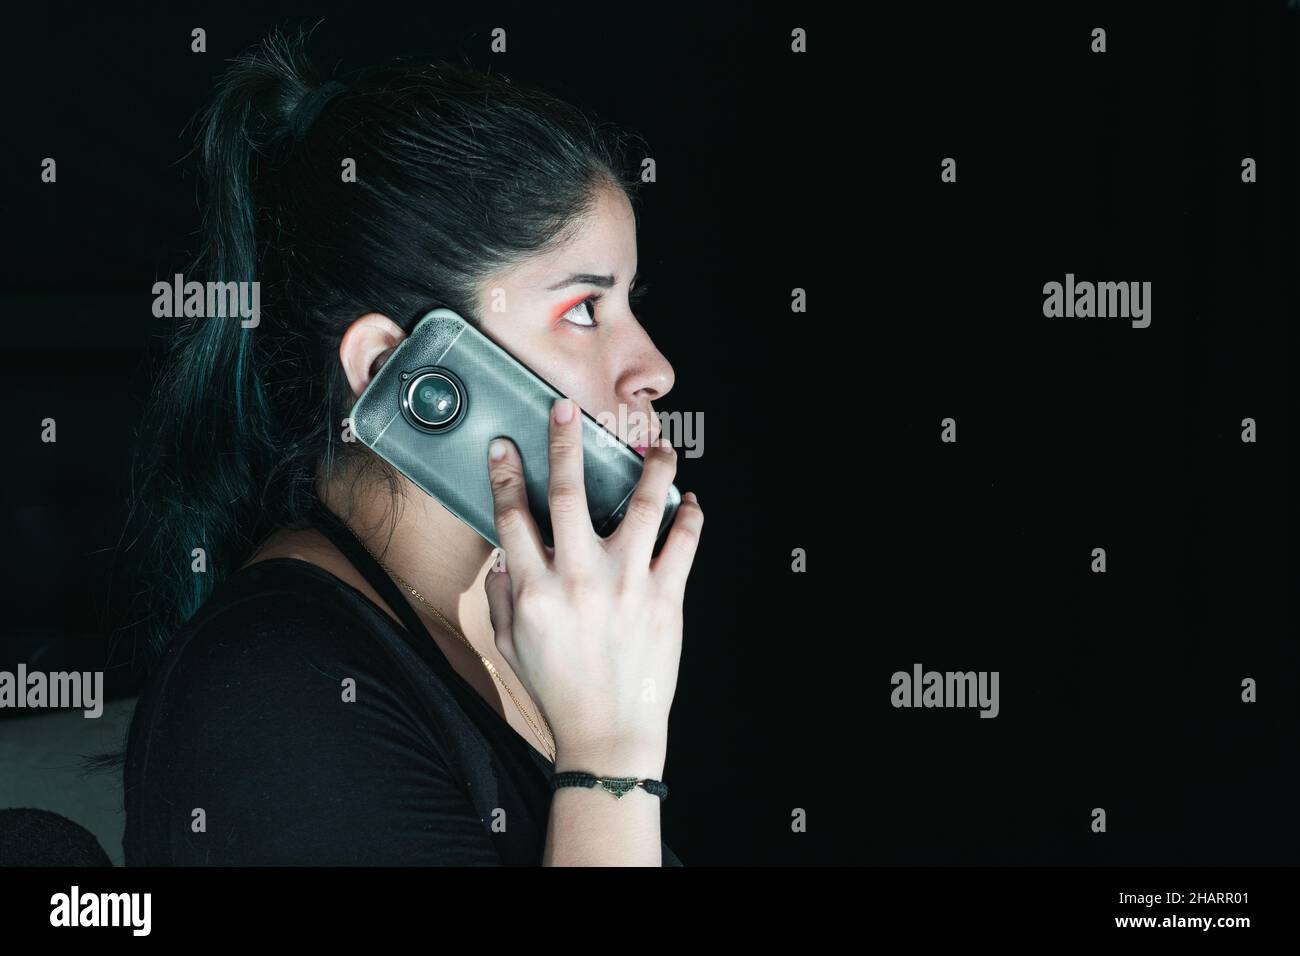 beautiful latina woman with green hair receiving an extortion call, with her cell phone in her hand. with her gaze upwards and serious look. with a bl Stock Photo